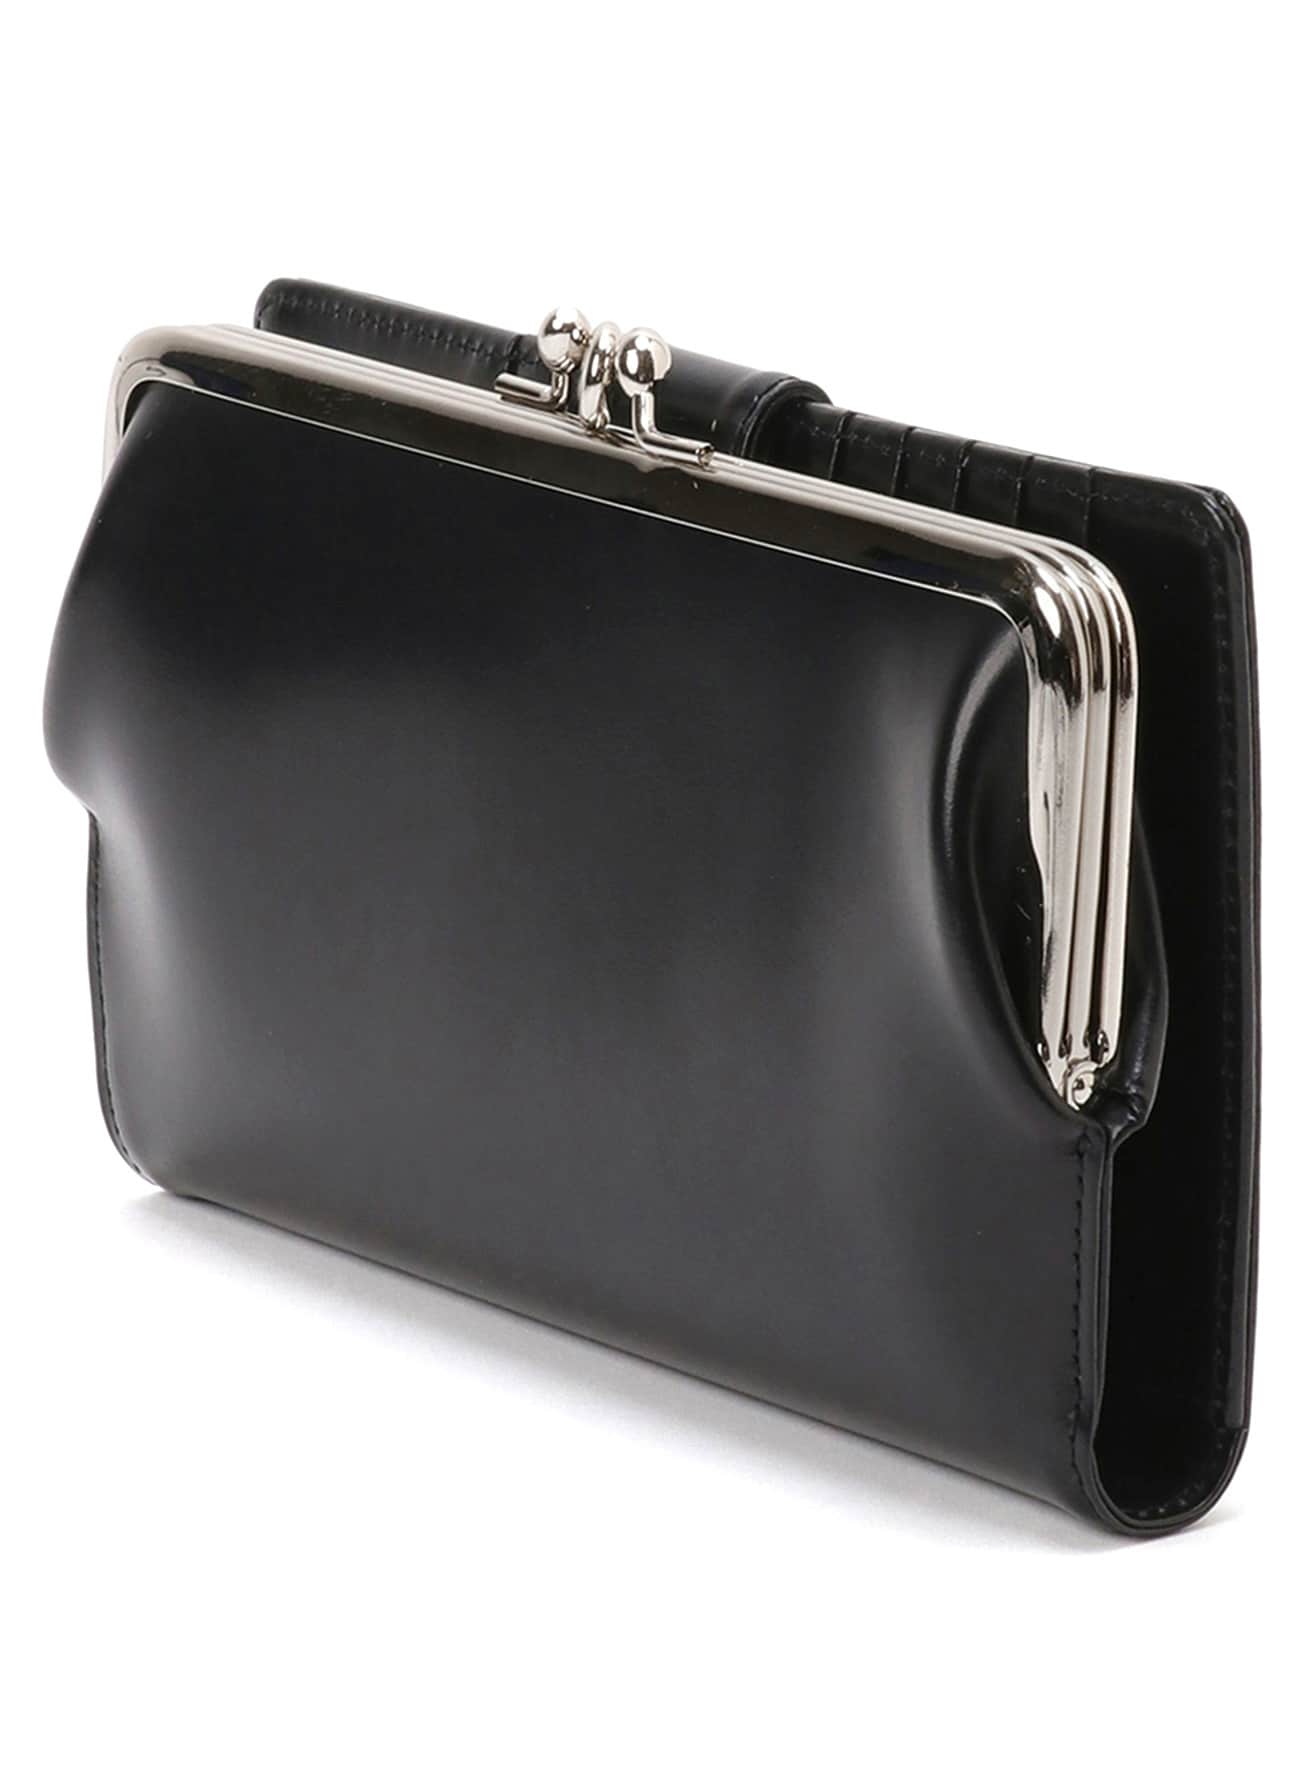 SEMIGLOSS LEATHER CLASP LONG WALLET